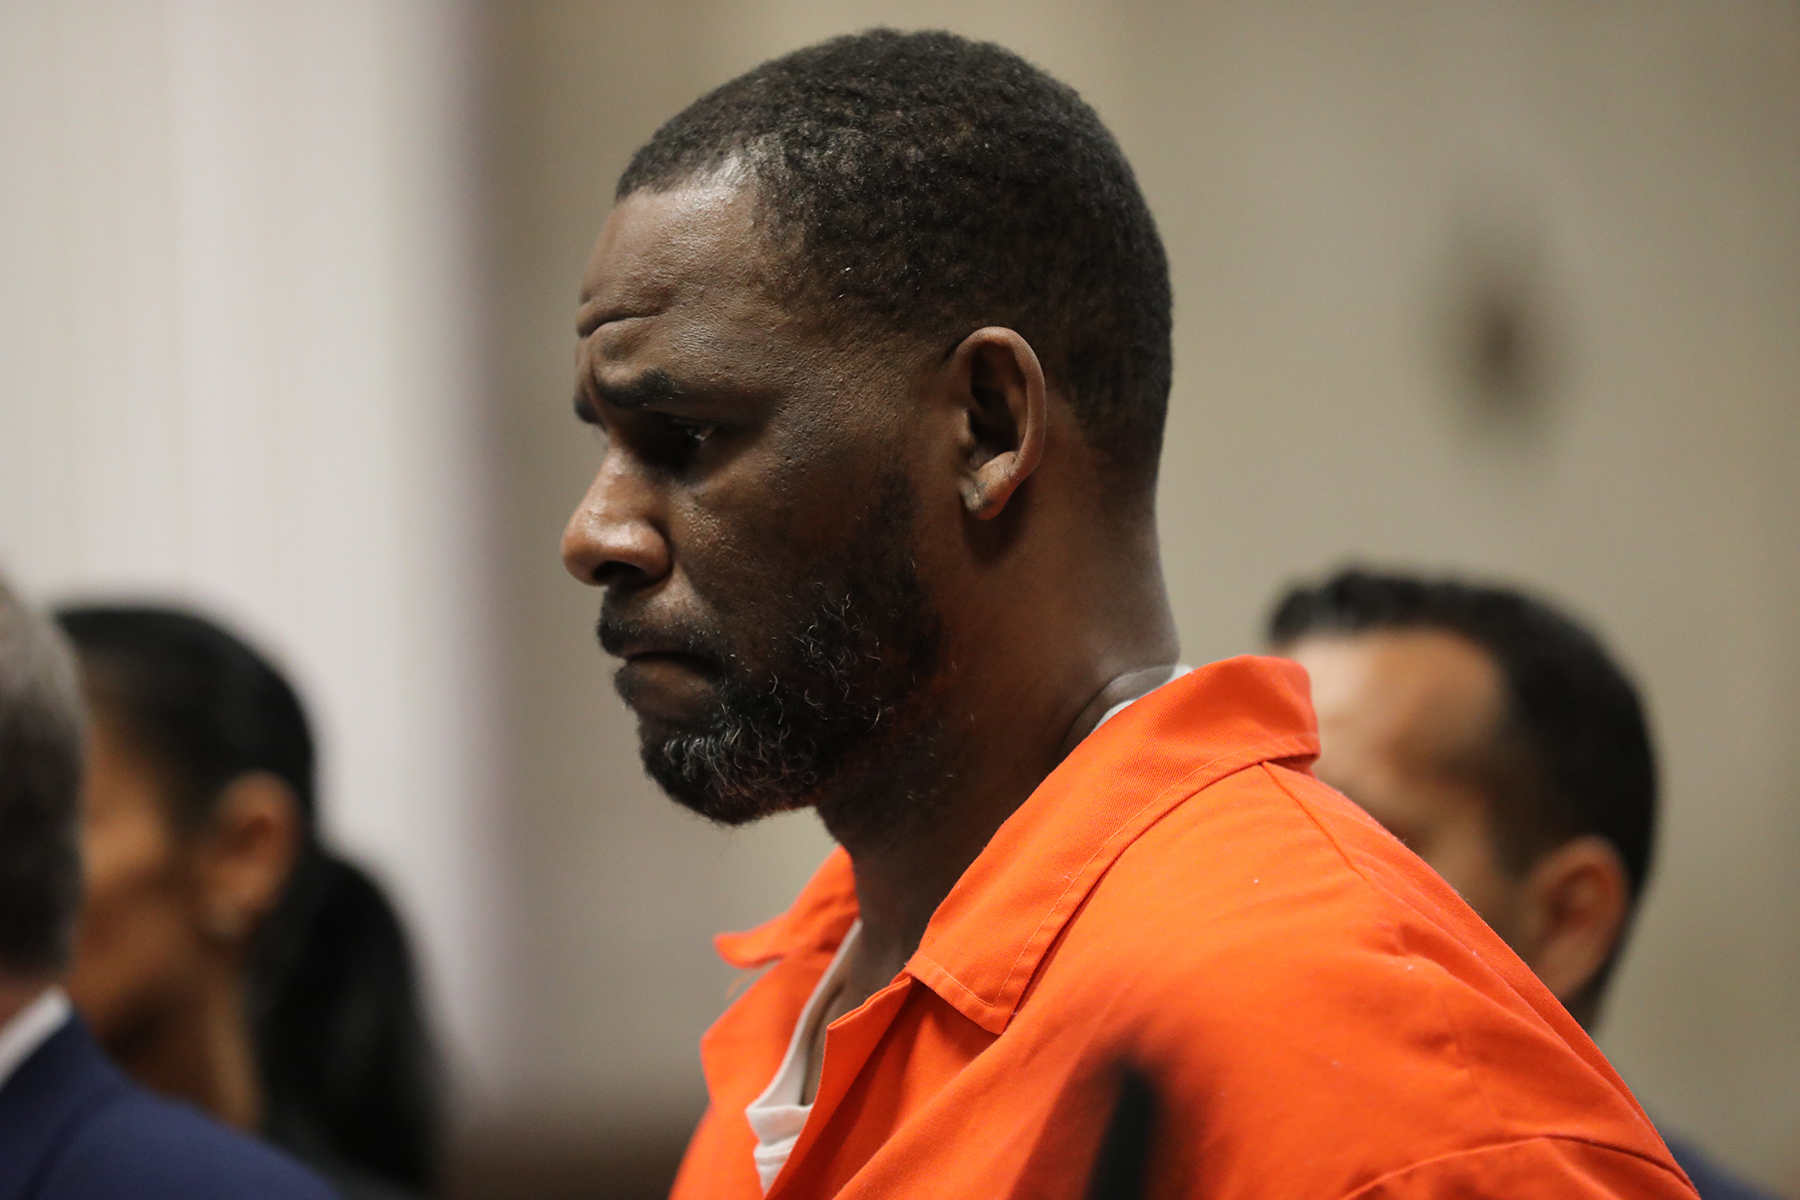 R. Kelly Found Guilty of Racketeering, Sex Trafficking